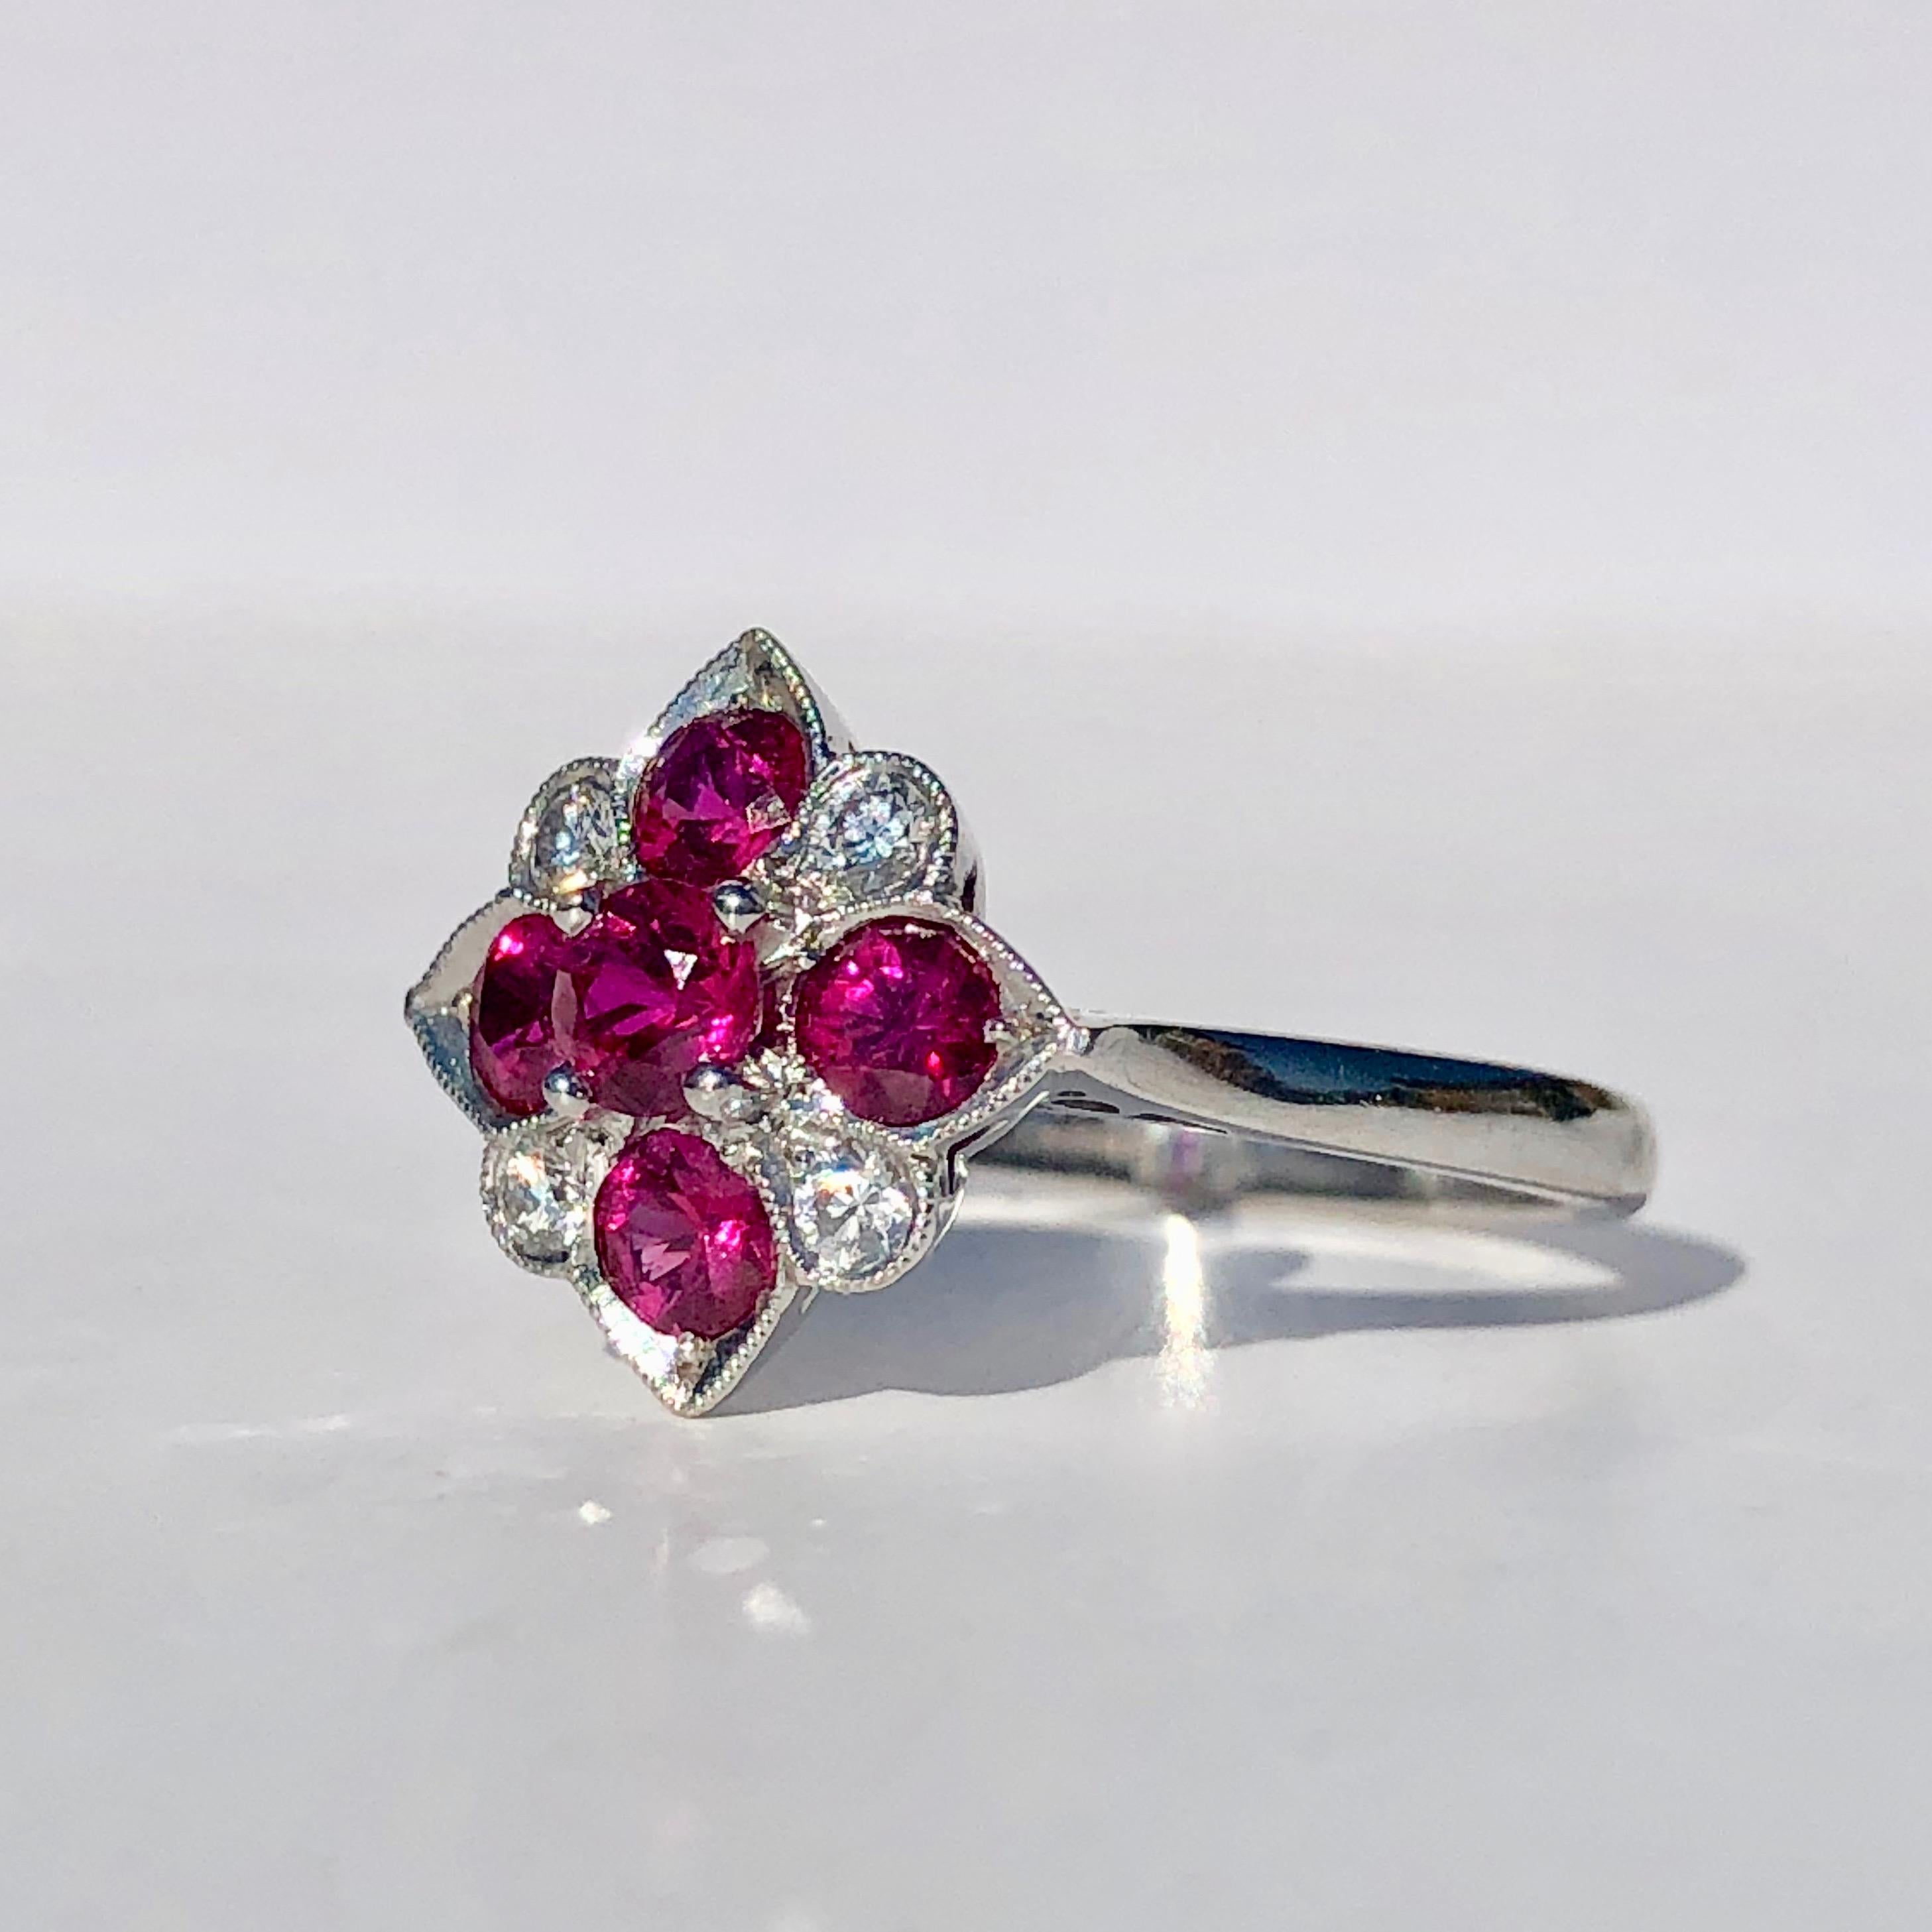 An excellent quality Ruby and Diamond cluster ring

Set with 5 bright round cut Rubies and four round brilliant cut diamonds on 18k white gold 

This ring is a size M1/2 and can be sized up or down by our workshop to fit any finger

12.67mm is the